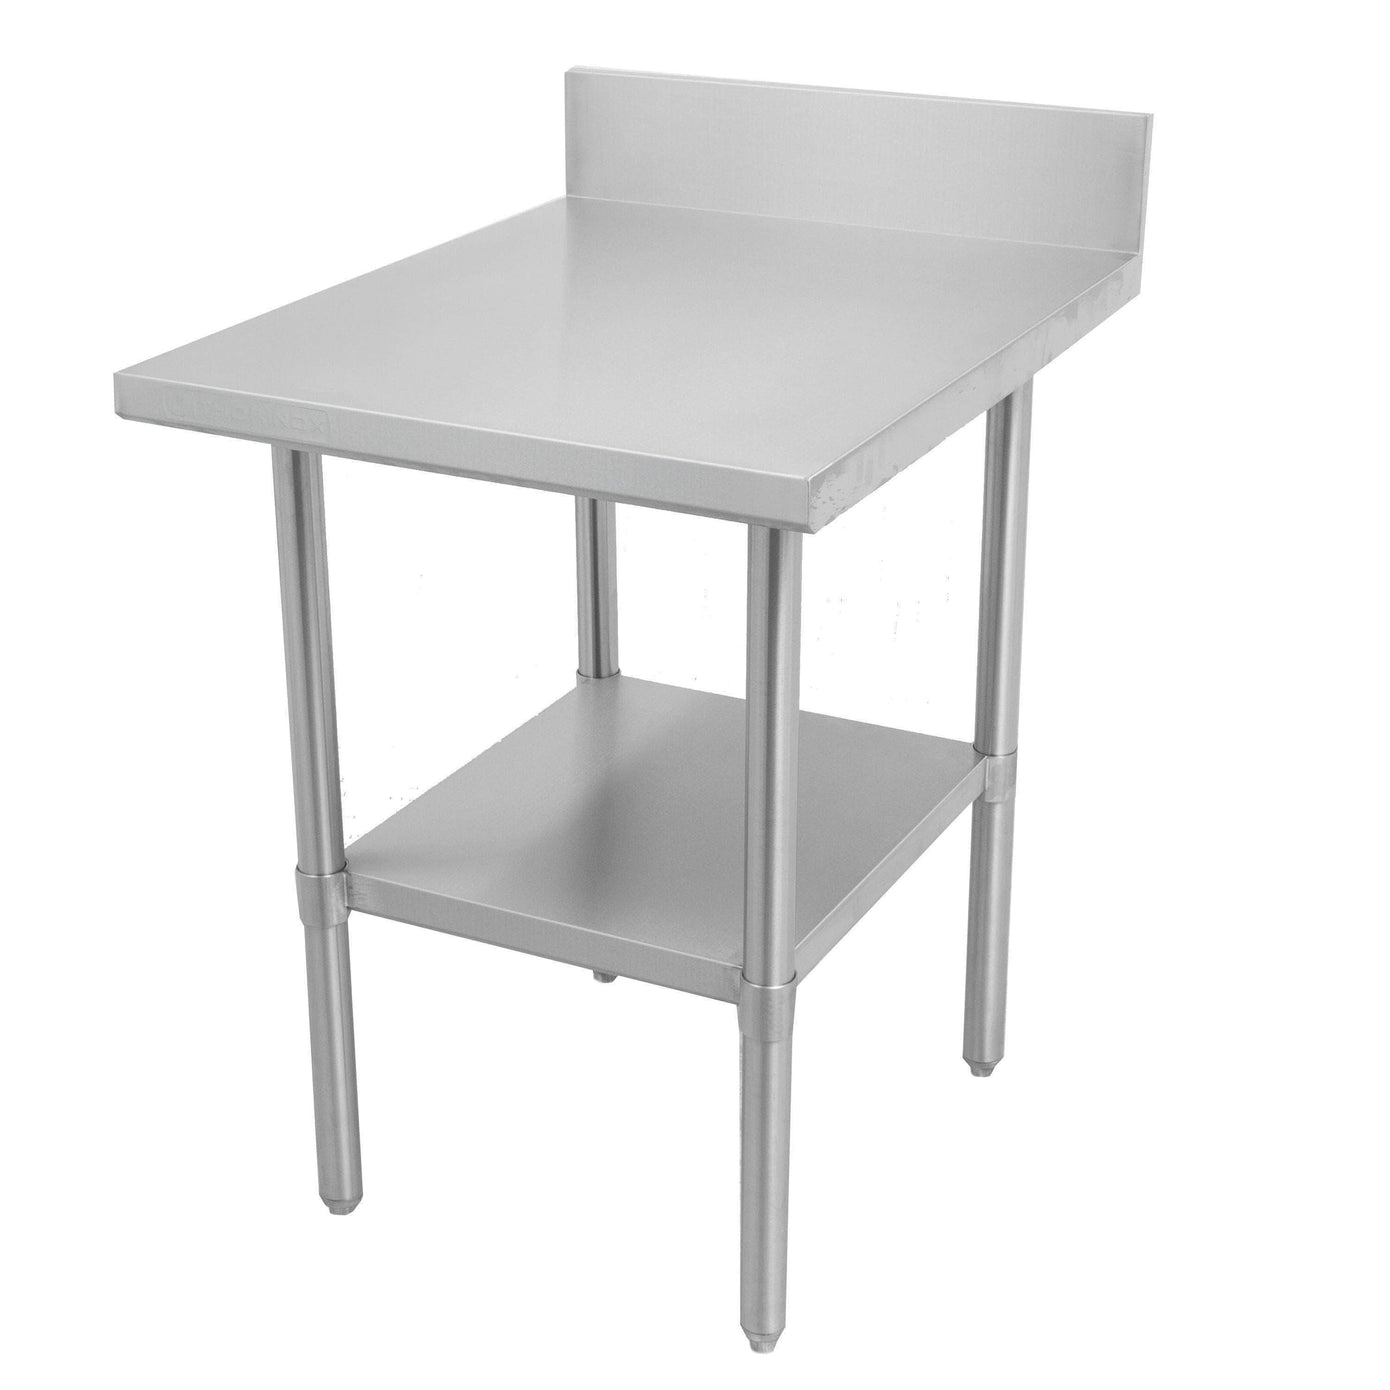 Thorinox DSST-3084-SS 30x84 Stainless Steel Table with Stainless Steel Shelf